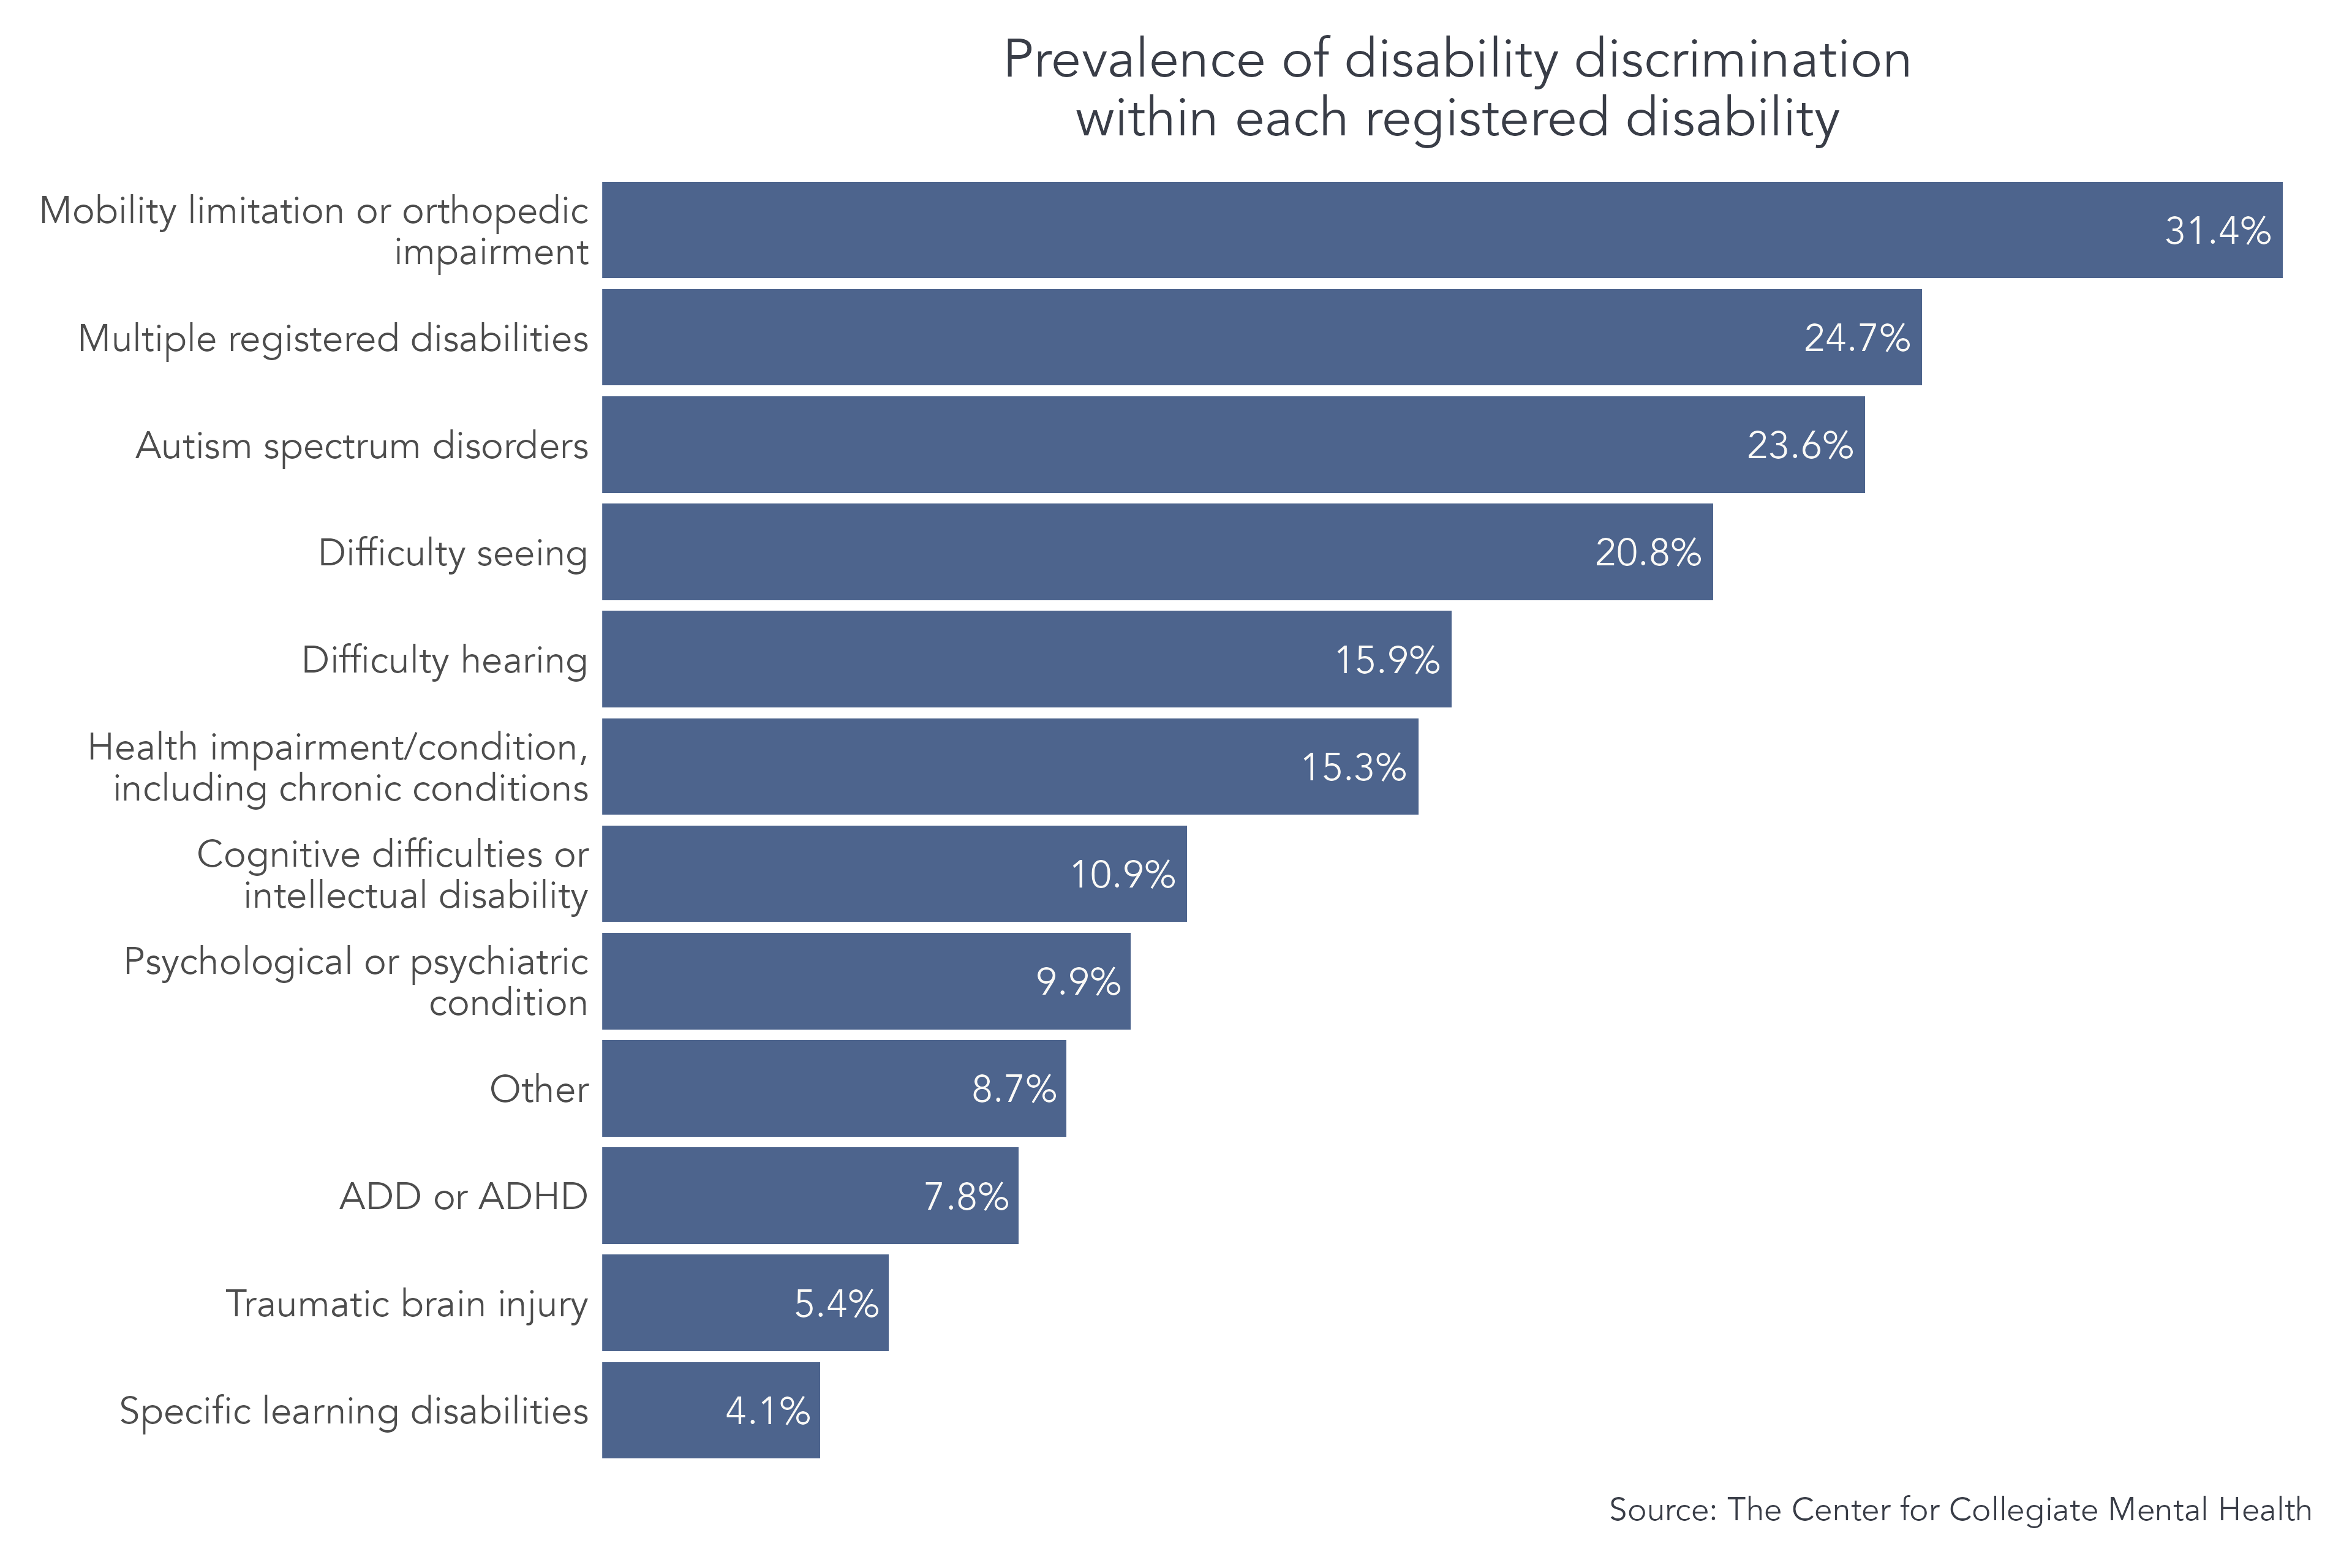 	Students who disclosed having a registered mobility or orthopedic impairment disability reported the highest rates of disability-based discrimination at 31.4%.  Notably, 24.7% of students with multiple registered disabilities and 23.6% of students with Autism Spectrum Disorder experienced disability discrimination.  